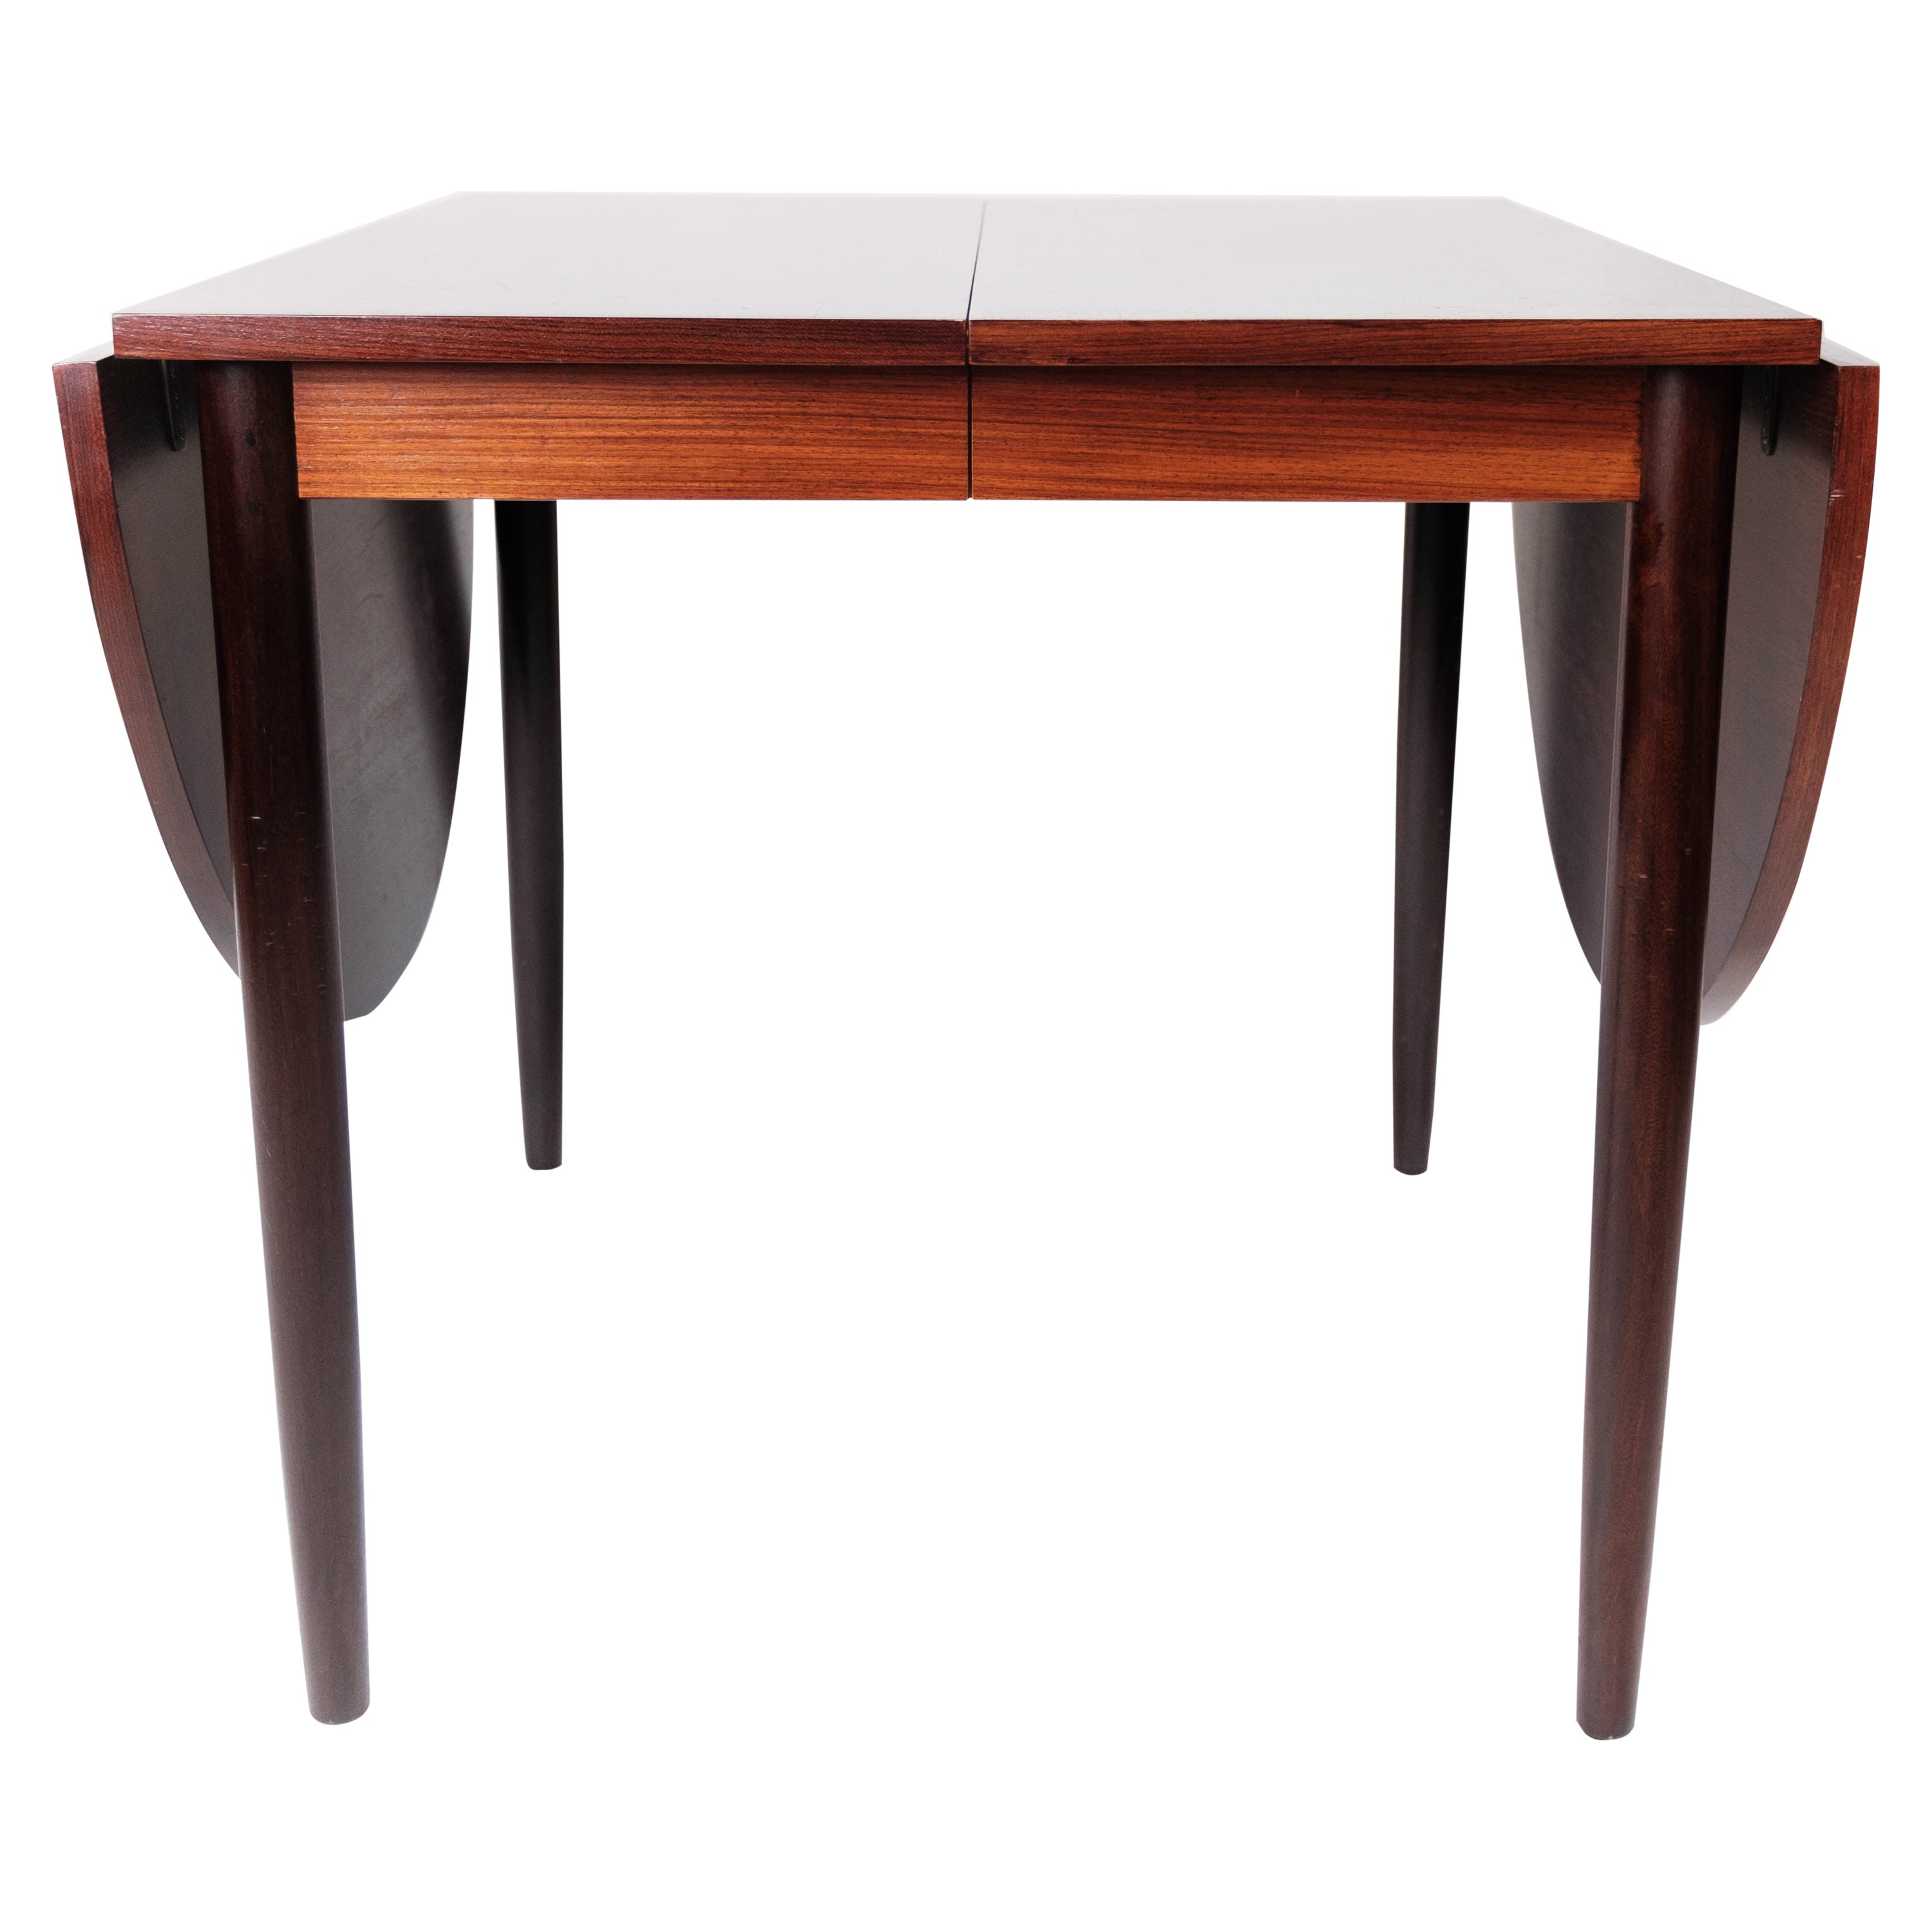 Dining Table Made In Rosewood With Extension Plates By Arne Vodder From 1960s